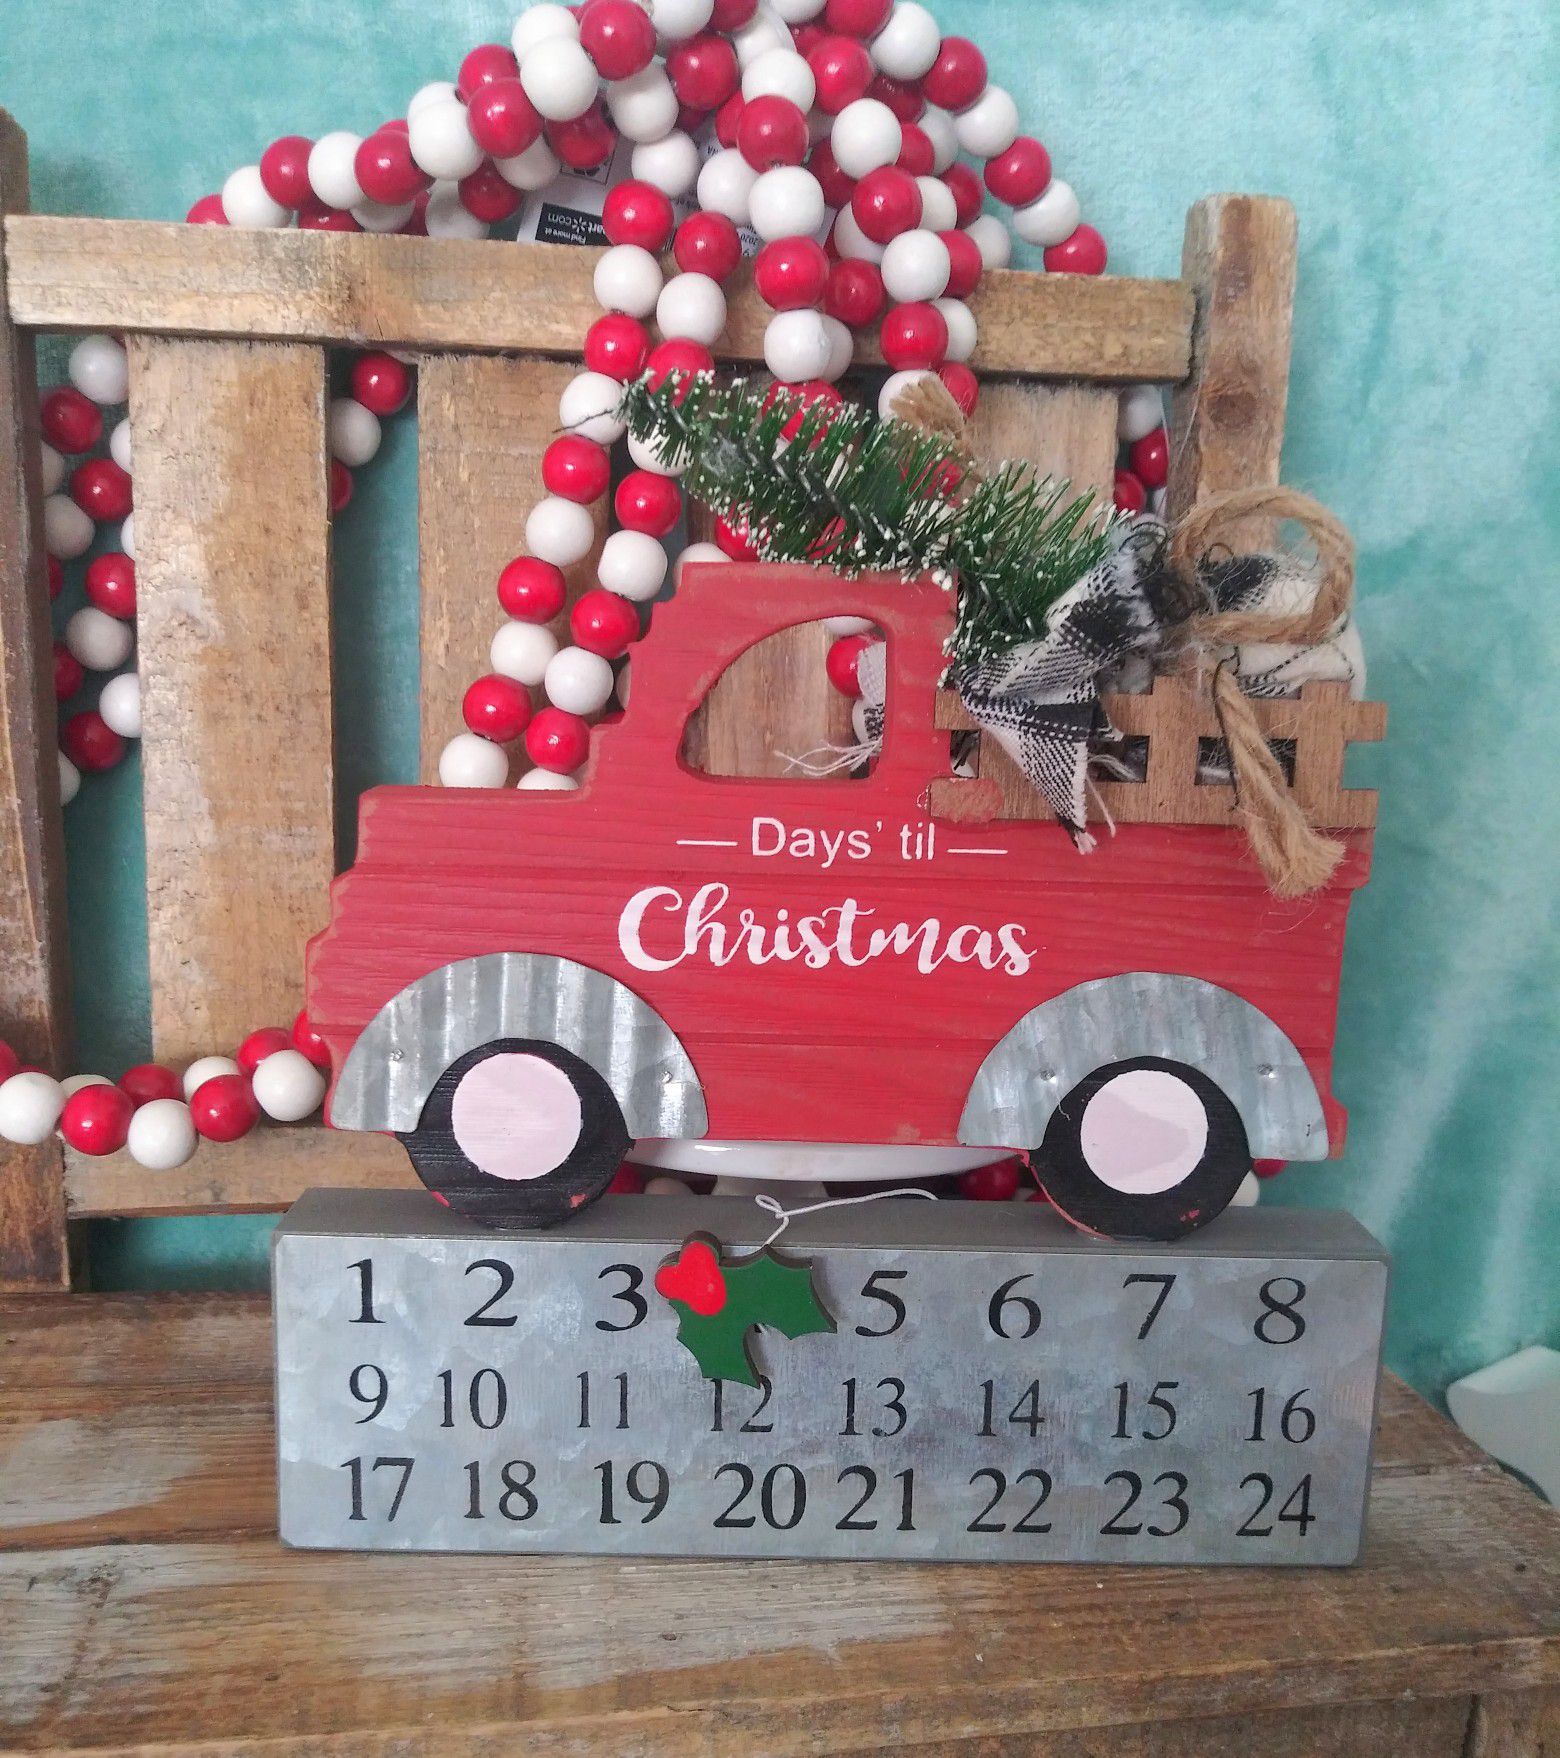 Famous red truck Christmas decor. Christmas countdown calendar with red truck and tree in the back. So cute!! Great for farmhouse decor